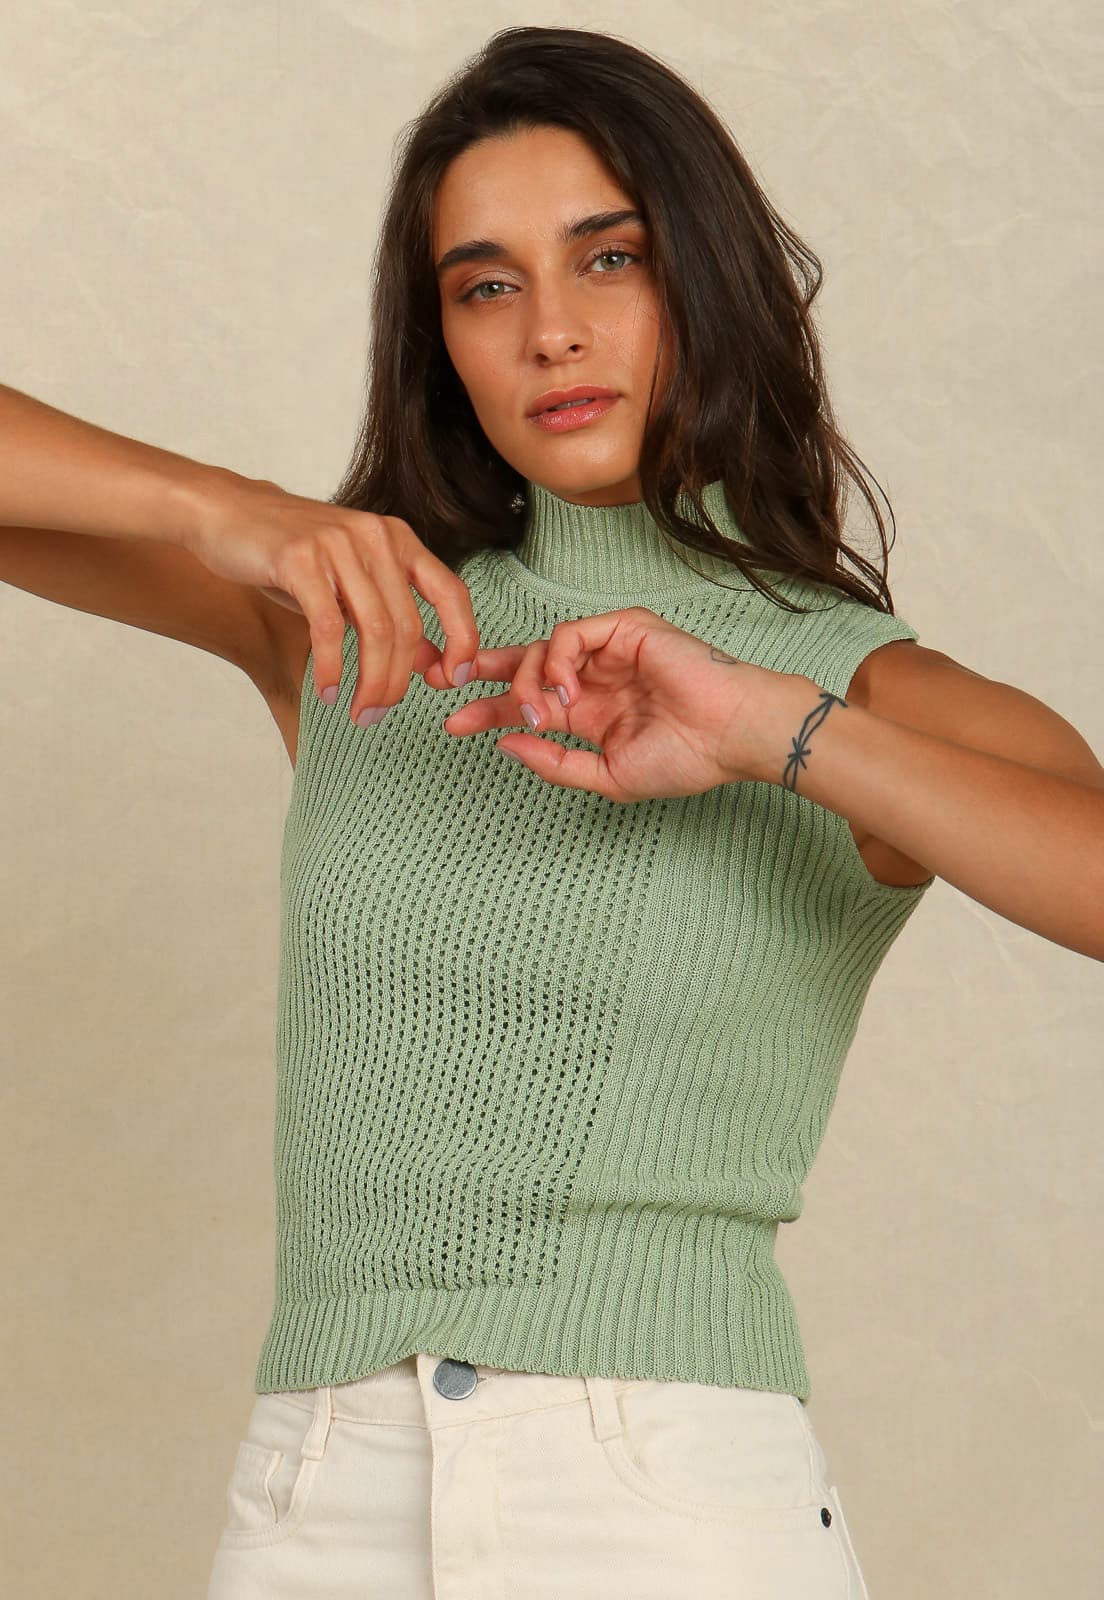 19601-BLUSA-CROPPED-TRICOT-VERDE-MATCHA_3